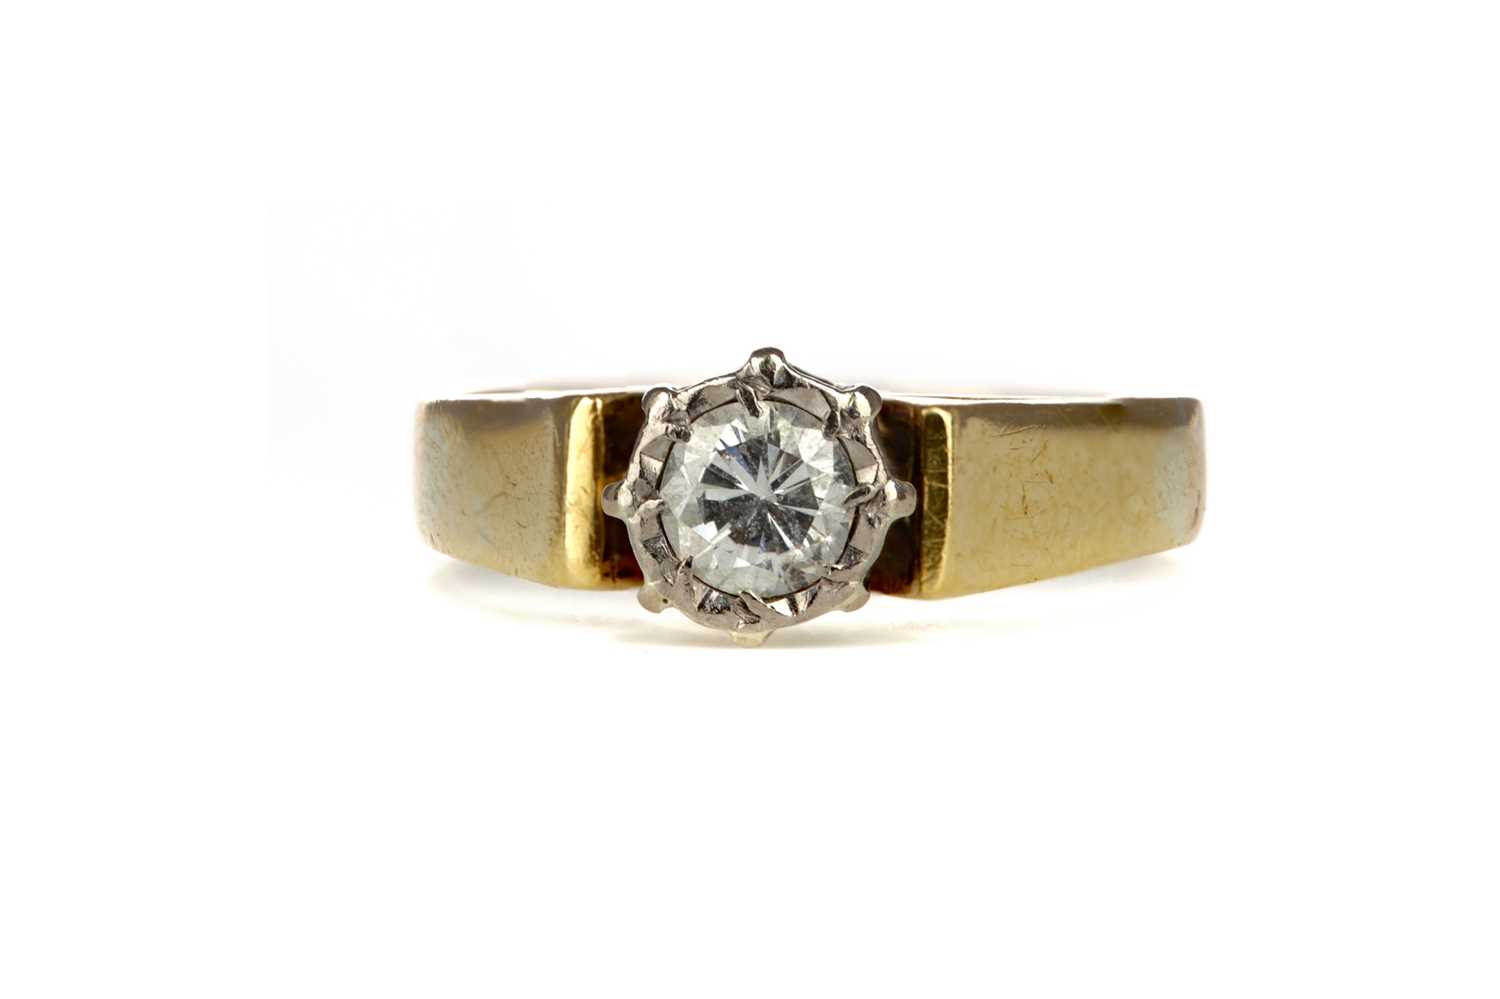 Lot 326 - A DIAMOND SOLITAIRE RING